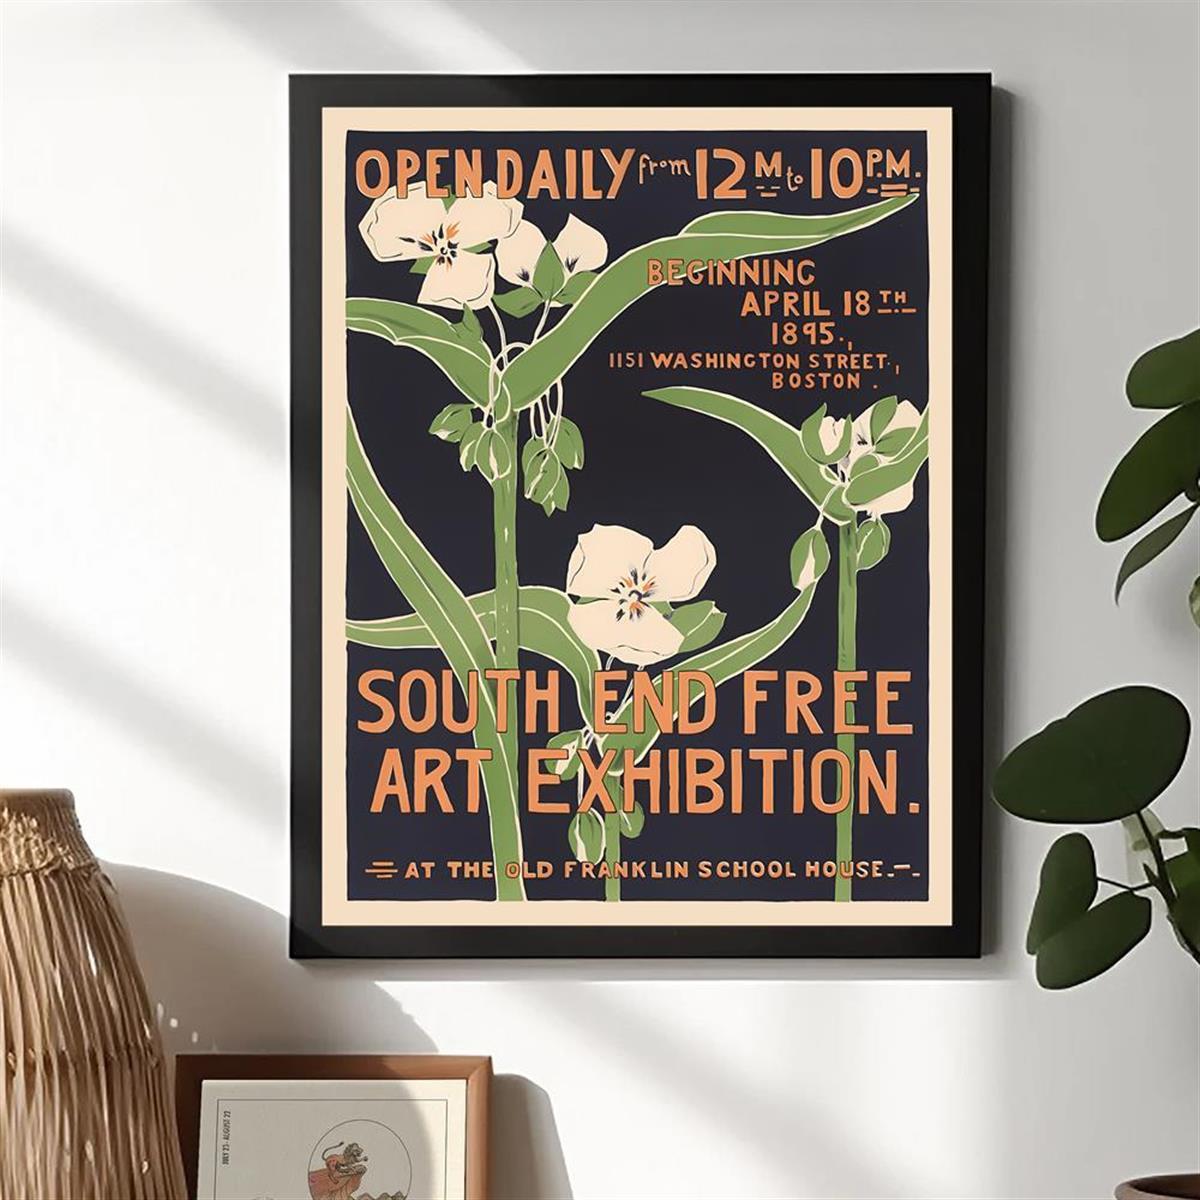 1pc canvas poster printed painting art nouveau print retro poster floral art print wall decor home room decor wall art unframed